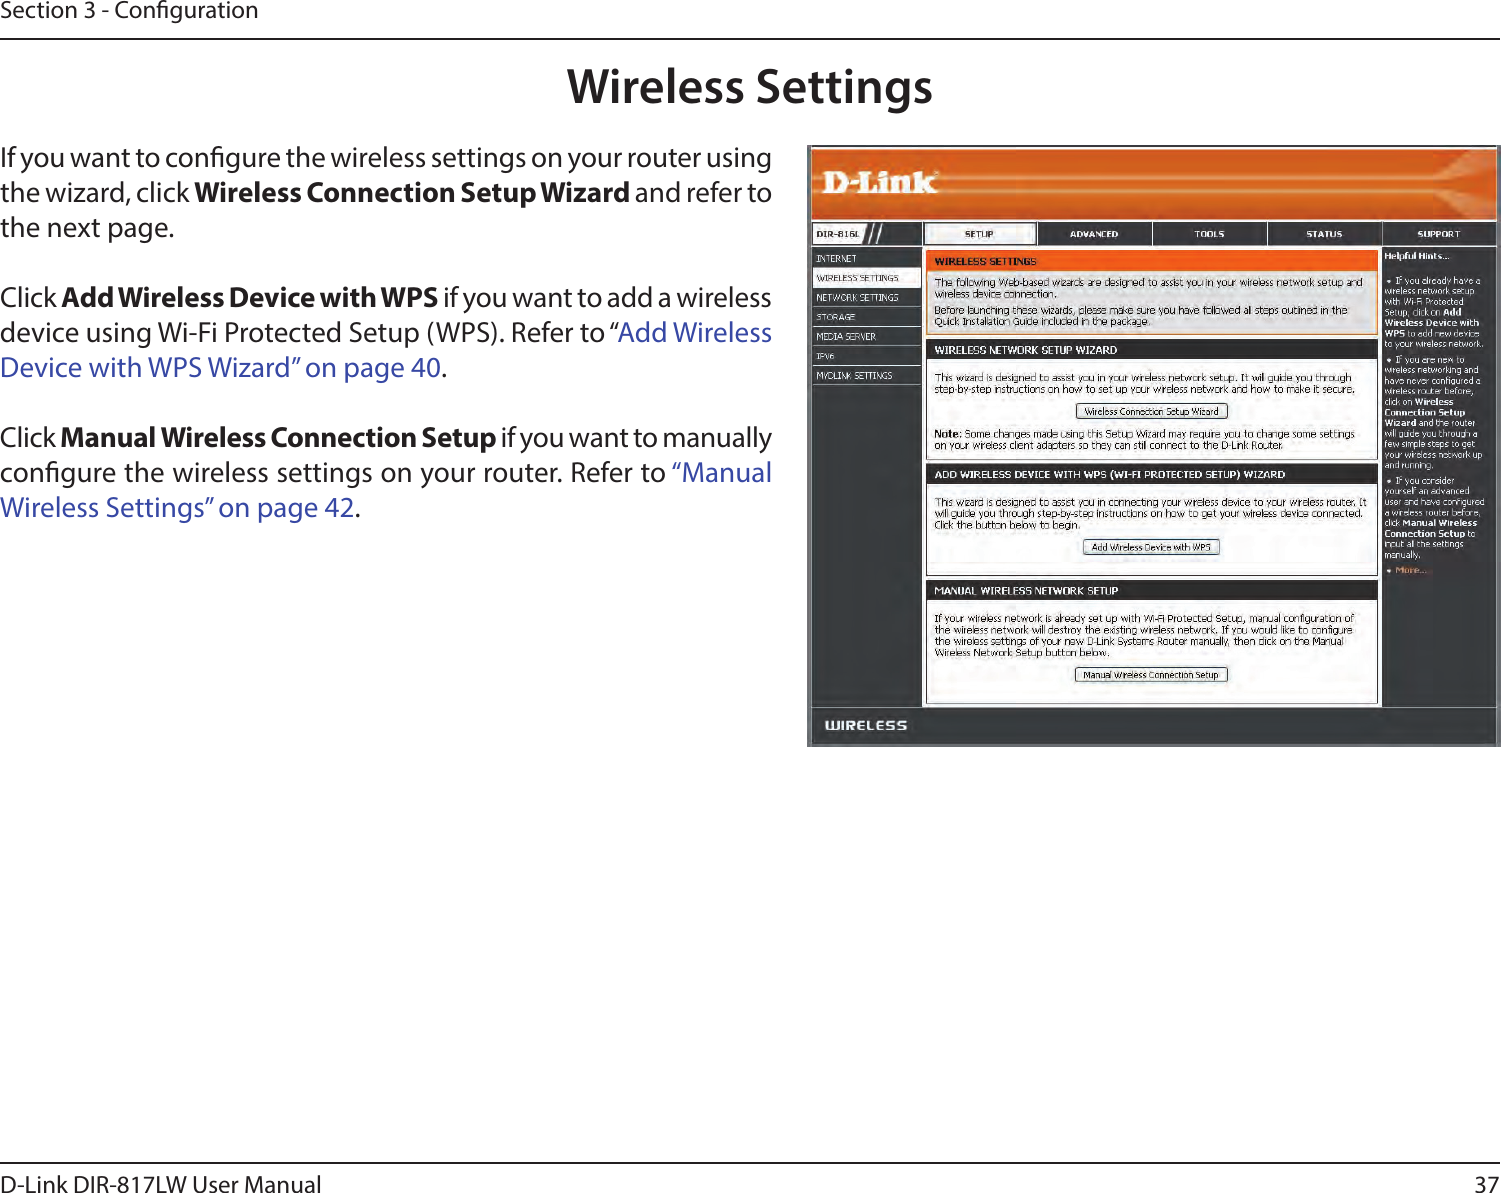 37D-Link DIR-817LW User ManualSection 3 - CongurationWireless SettingsIf you want to congure the wireless settings on your router using the wizard, click Wireless Connection Setup Wizard and refer to the next page.Click Add Wireless Device with WPS if you want to add a wireless device using Wi-Fi Protected Setup (WPS). Refer to “Add Wireless Device with WPS Wizard” on page 40.Click Manual Wireless Connection Setup if you want to manually congure the wireless settings on your router. Refer to “Manual Wireless Settings” on page 42.